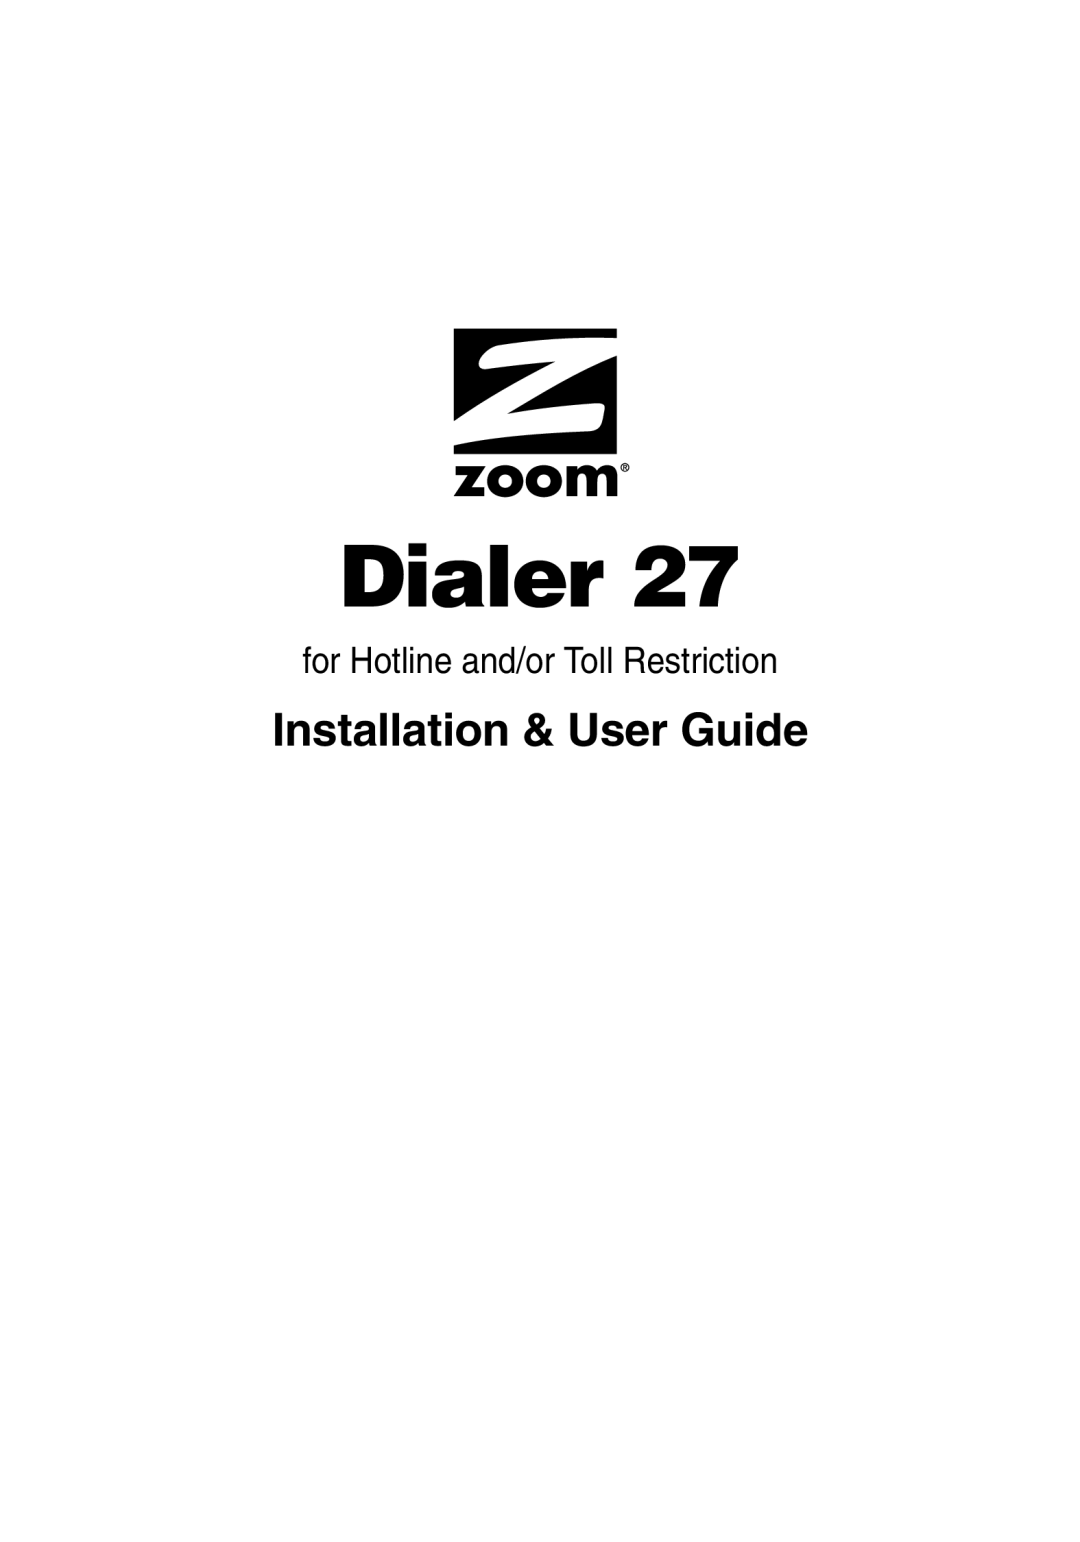 Zoom Dialer 27 manual Installation & User Guide, for Hotline and/or Toll Restriction 